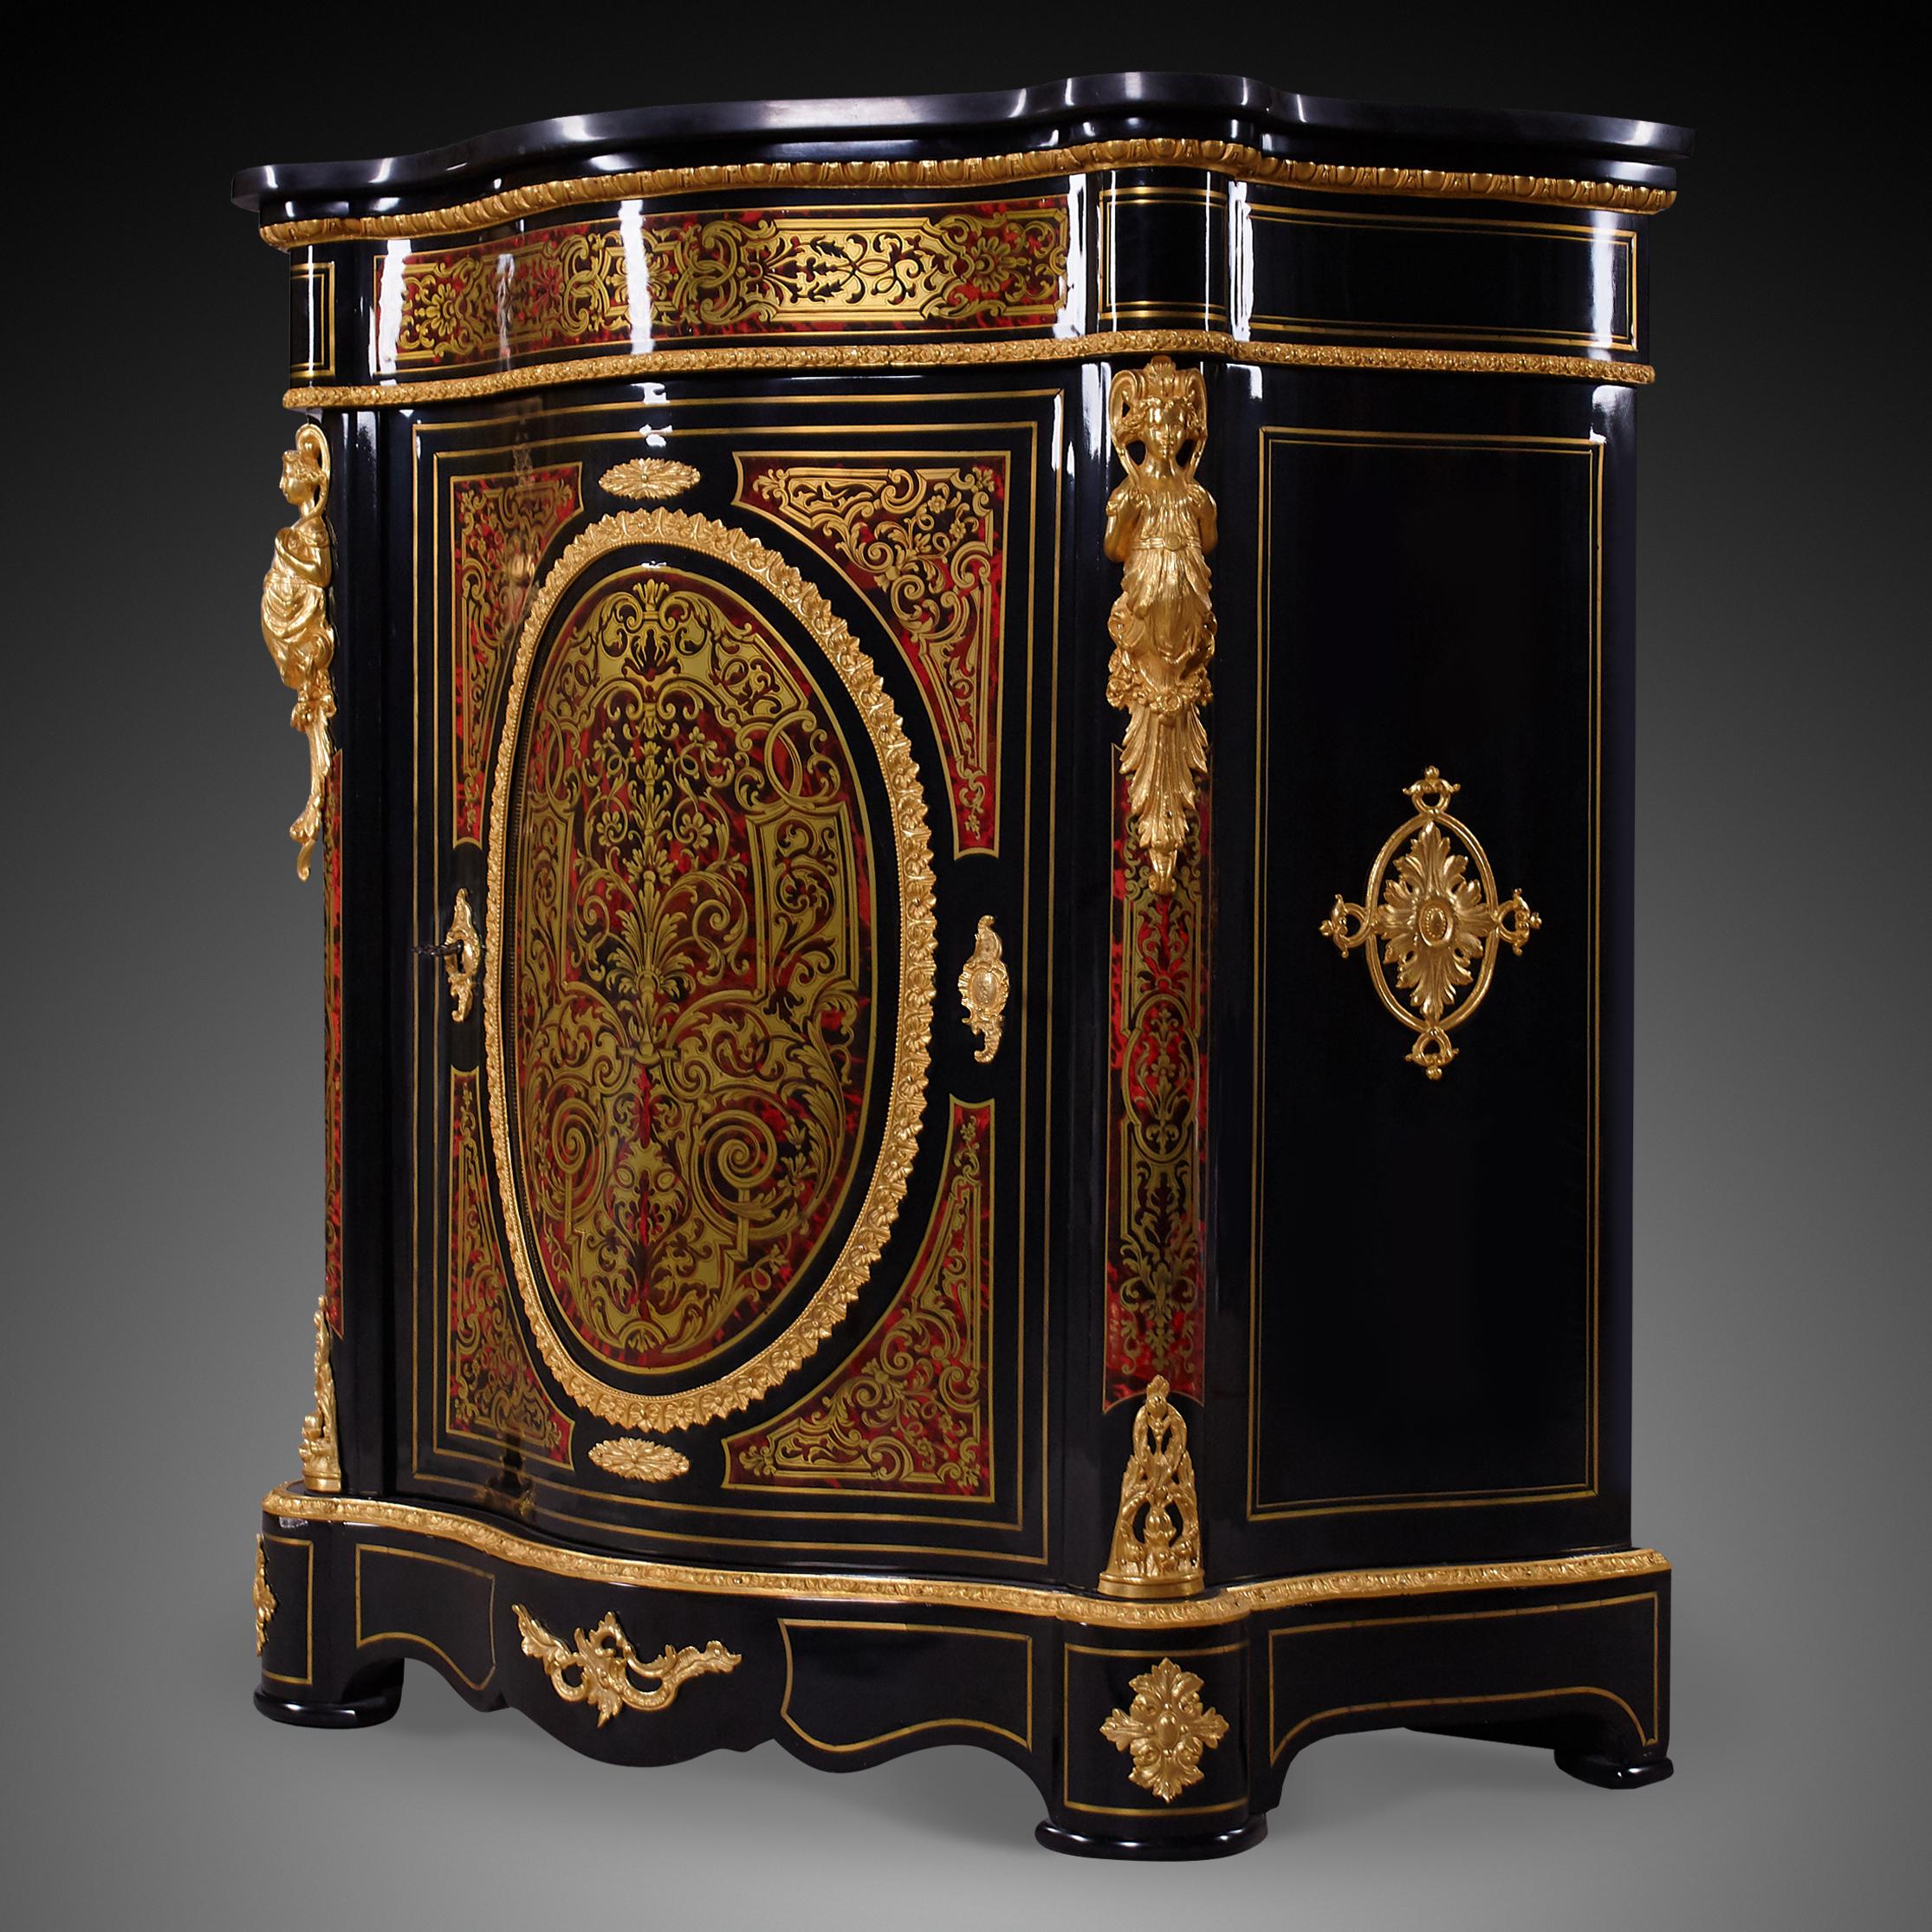 French antique Boulle cabinet.
Boulle one of France’s leading cabinetmakers, whose fashion of inlaying, called boulle, or buhl, work, swept Europe and was heavily imitated during the 18th and 19th centuries. Multitalented, Boulle practiced as an